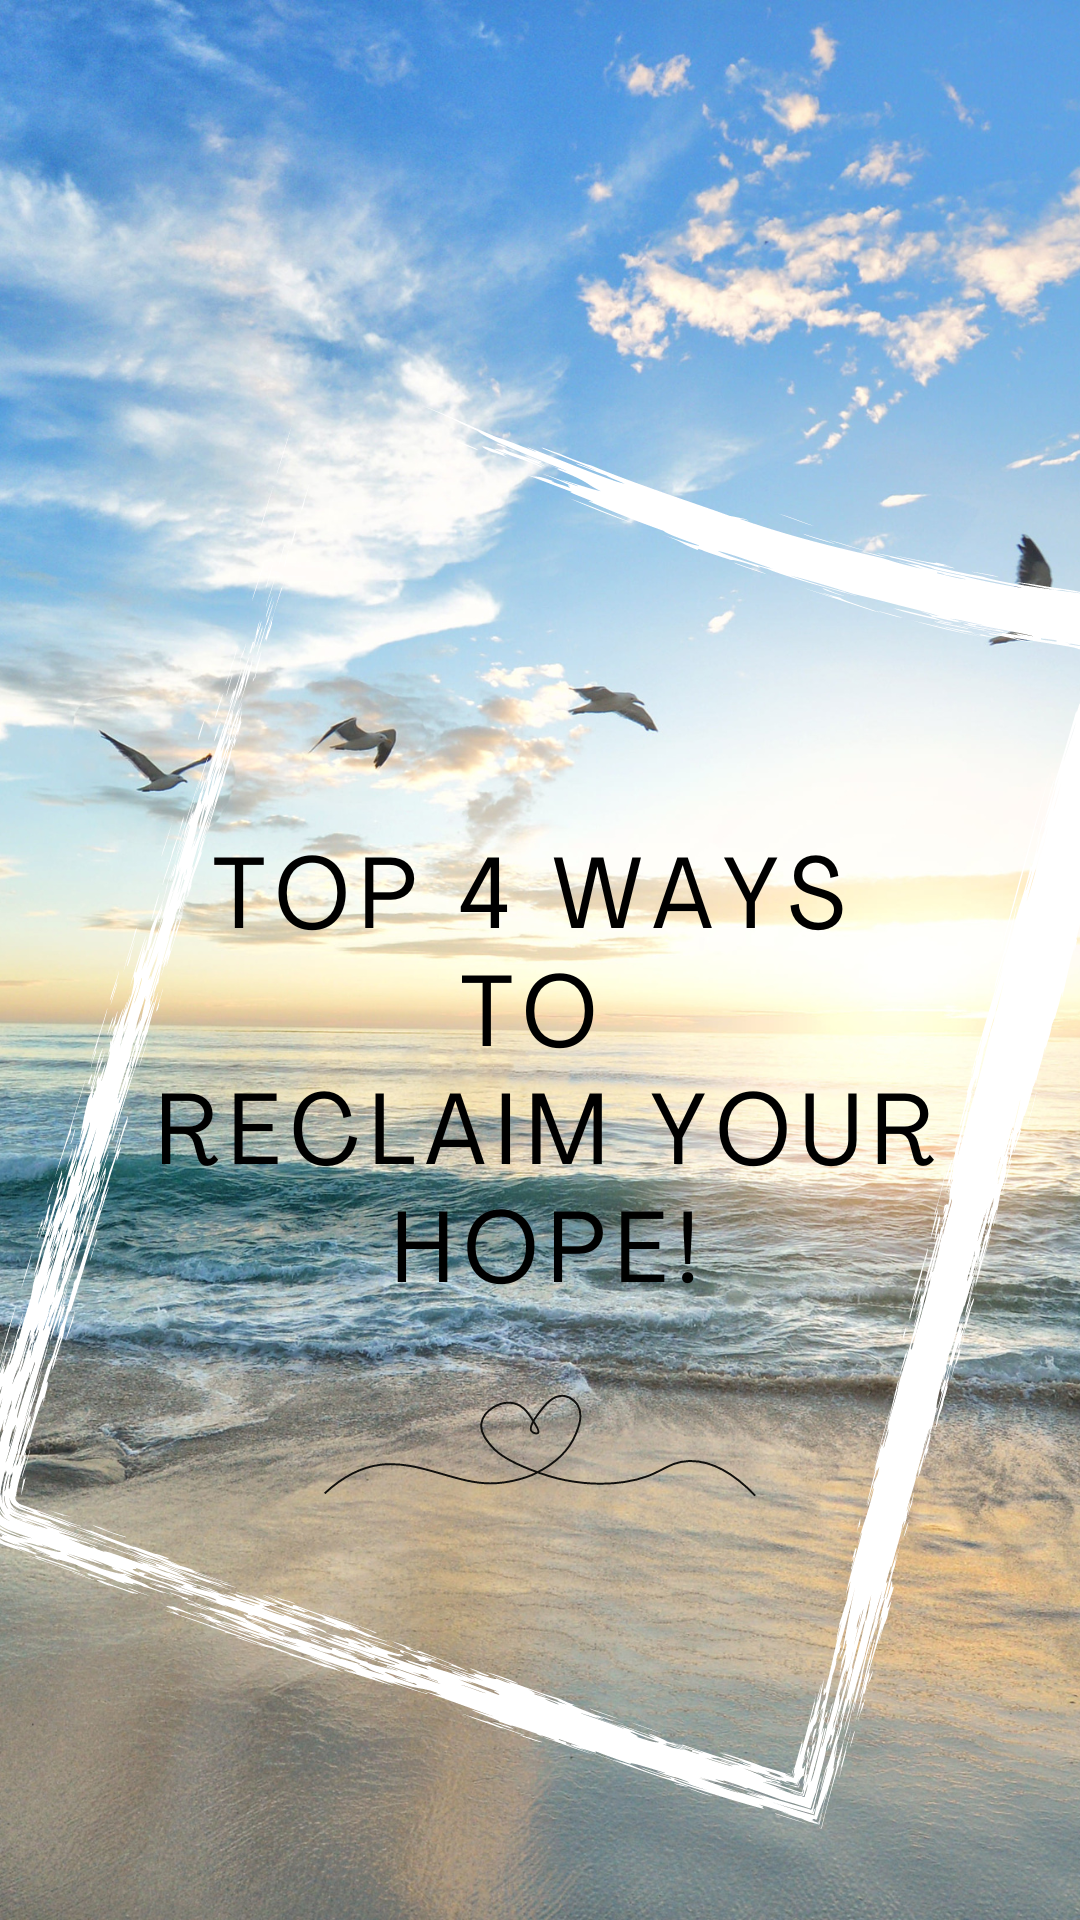 Top 4 Ways to Reclaiming Hope